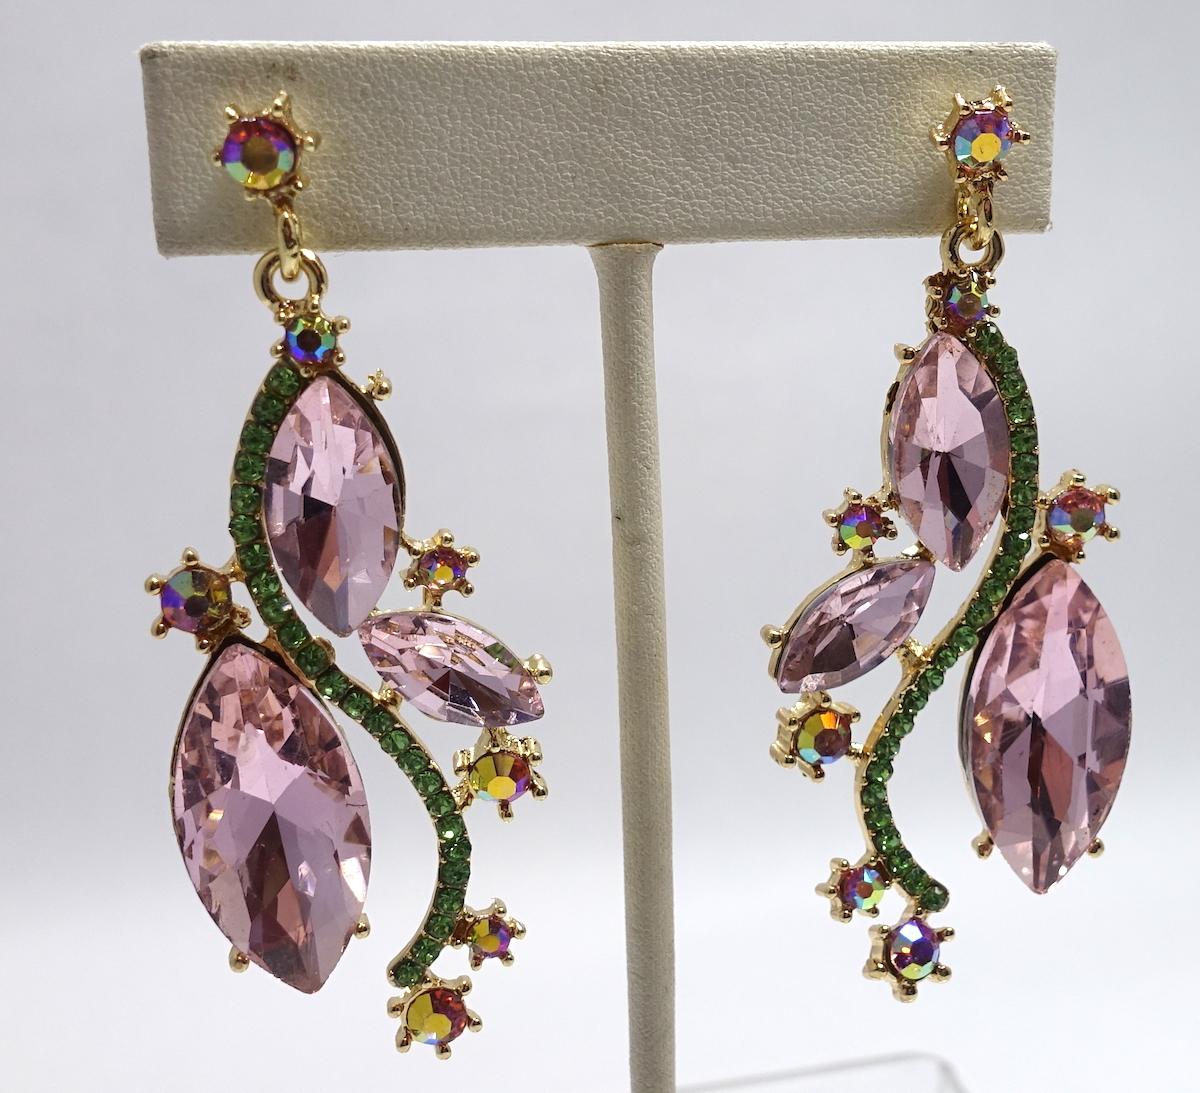 These earrings feature peridot and pink crystals in a gold-tone setting.  These pierce earrings measure 2-3/4” x 1-1/8” and are in excellent condition.